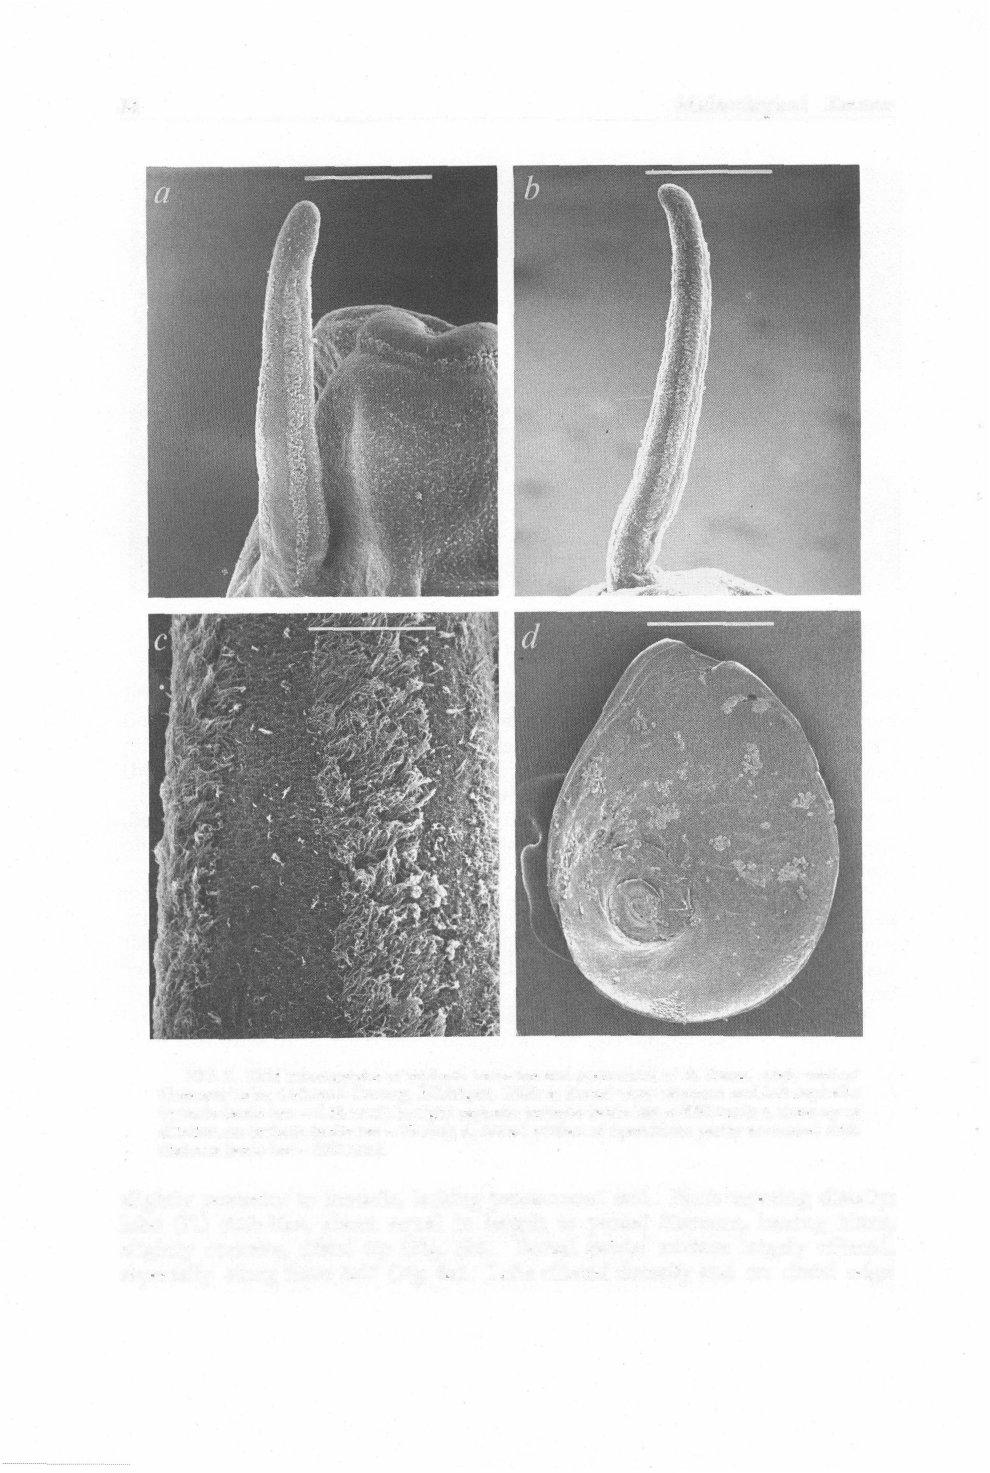 84 Malacological Review FIG. 3. SEM micrographs of cephalic tentacles and operculum of A.